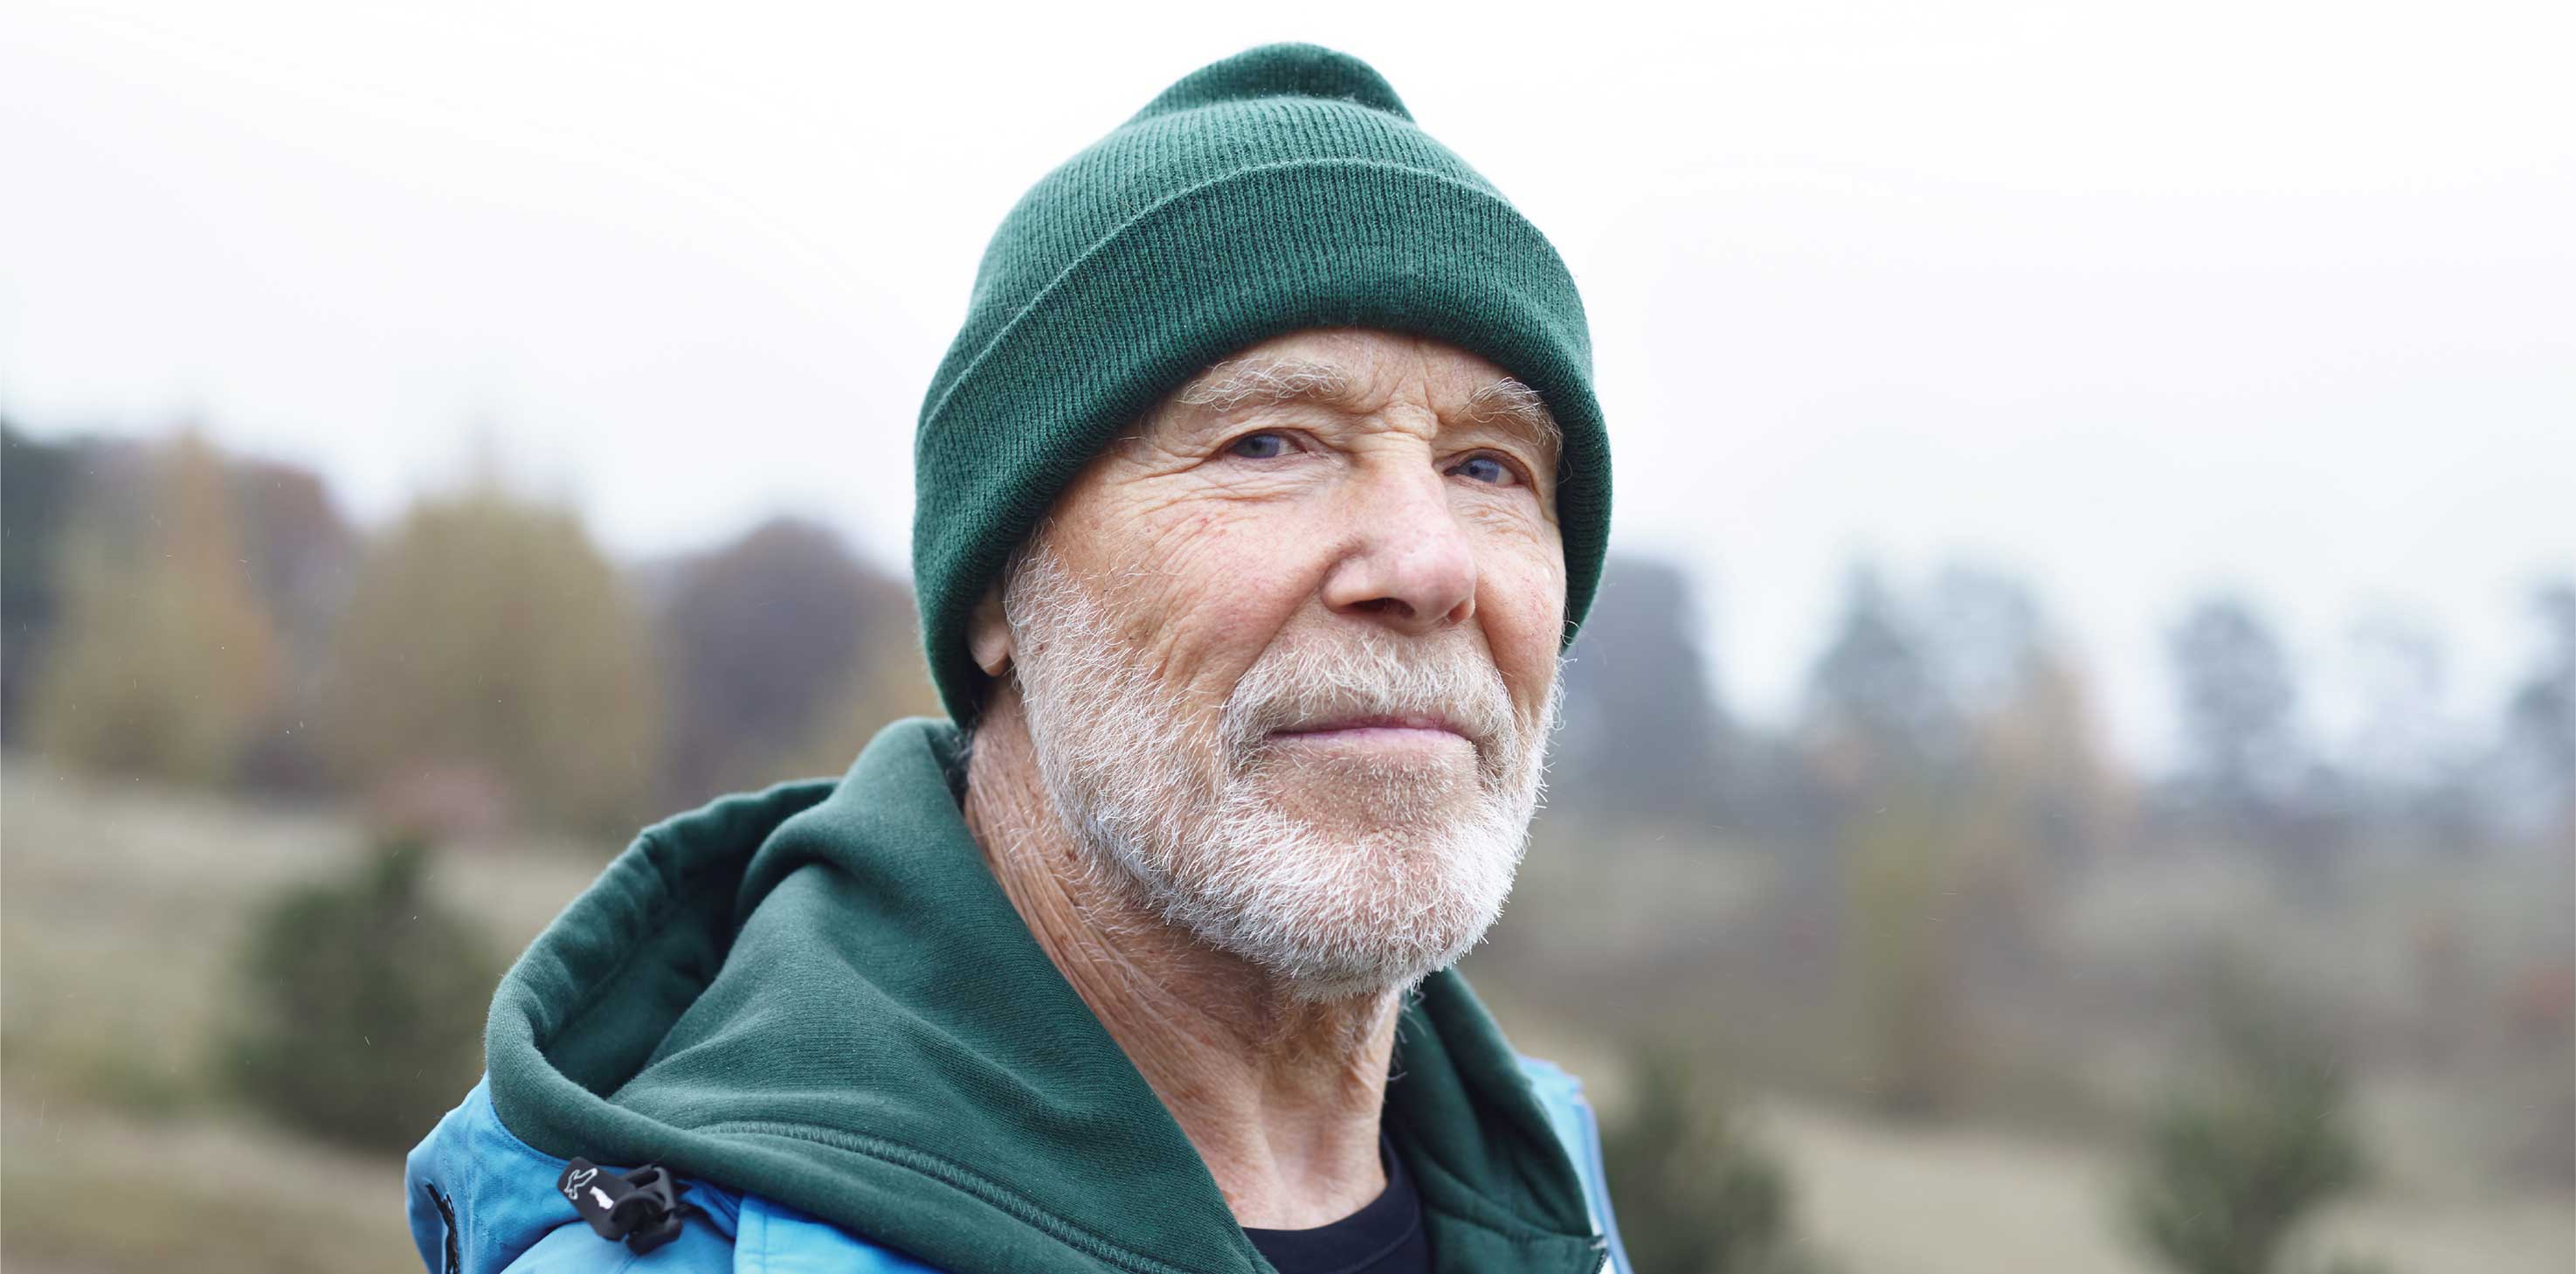 A headshot of an elderly Caucasian man, wearing a beanie and smiling softly at the camera.